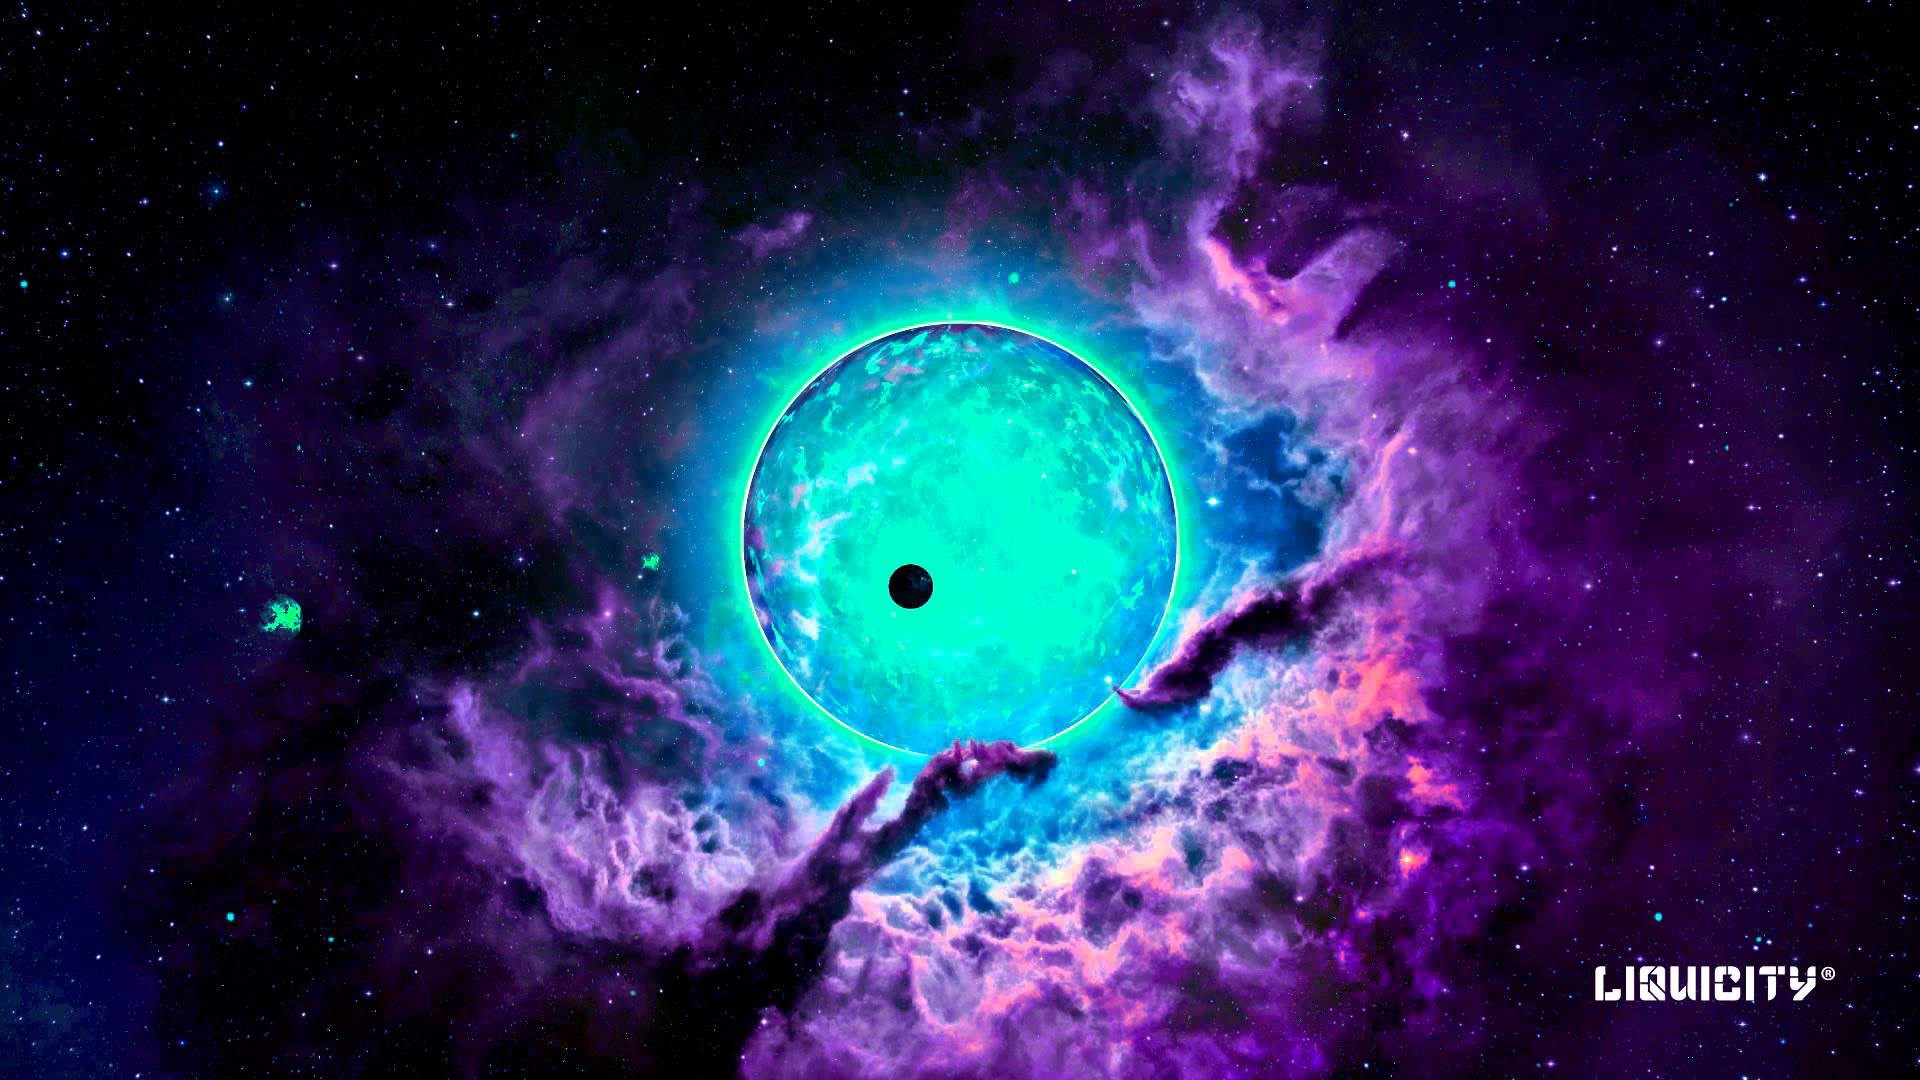 General 1920x1080 Liquicity drum and bass digital art purple sphere turquoise cyan music space